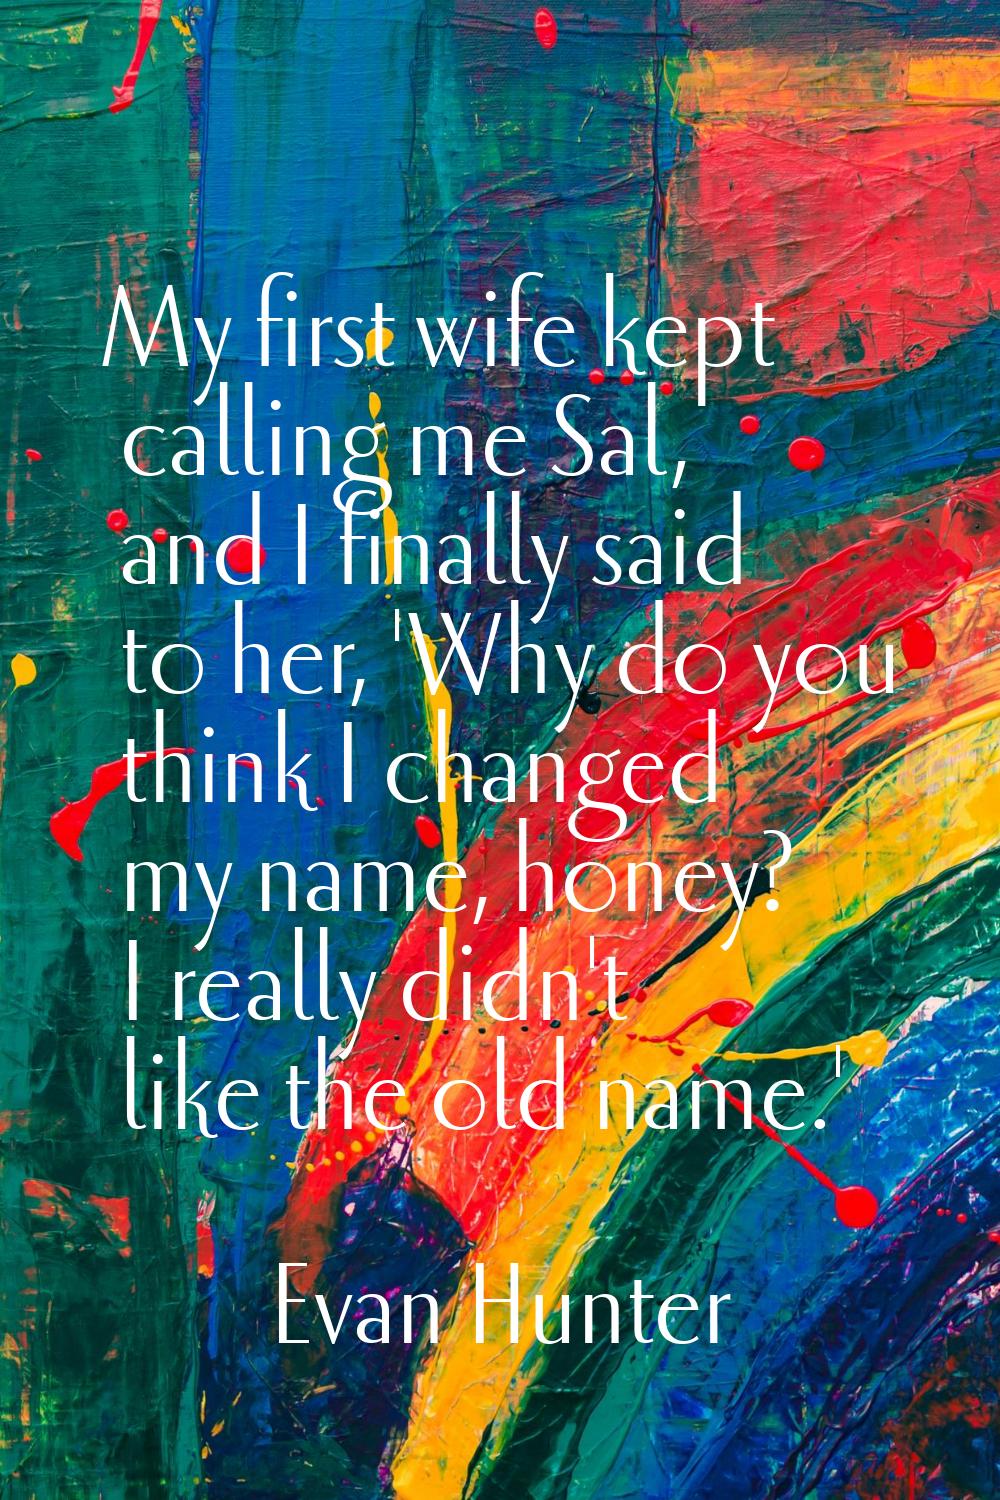 My first wife kept calling me Sal, and I finally said to her, 'Why do you think I changed my name, 